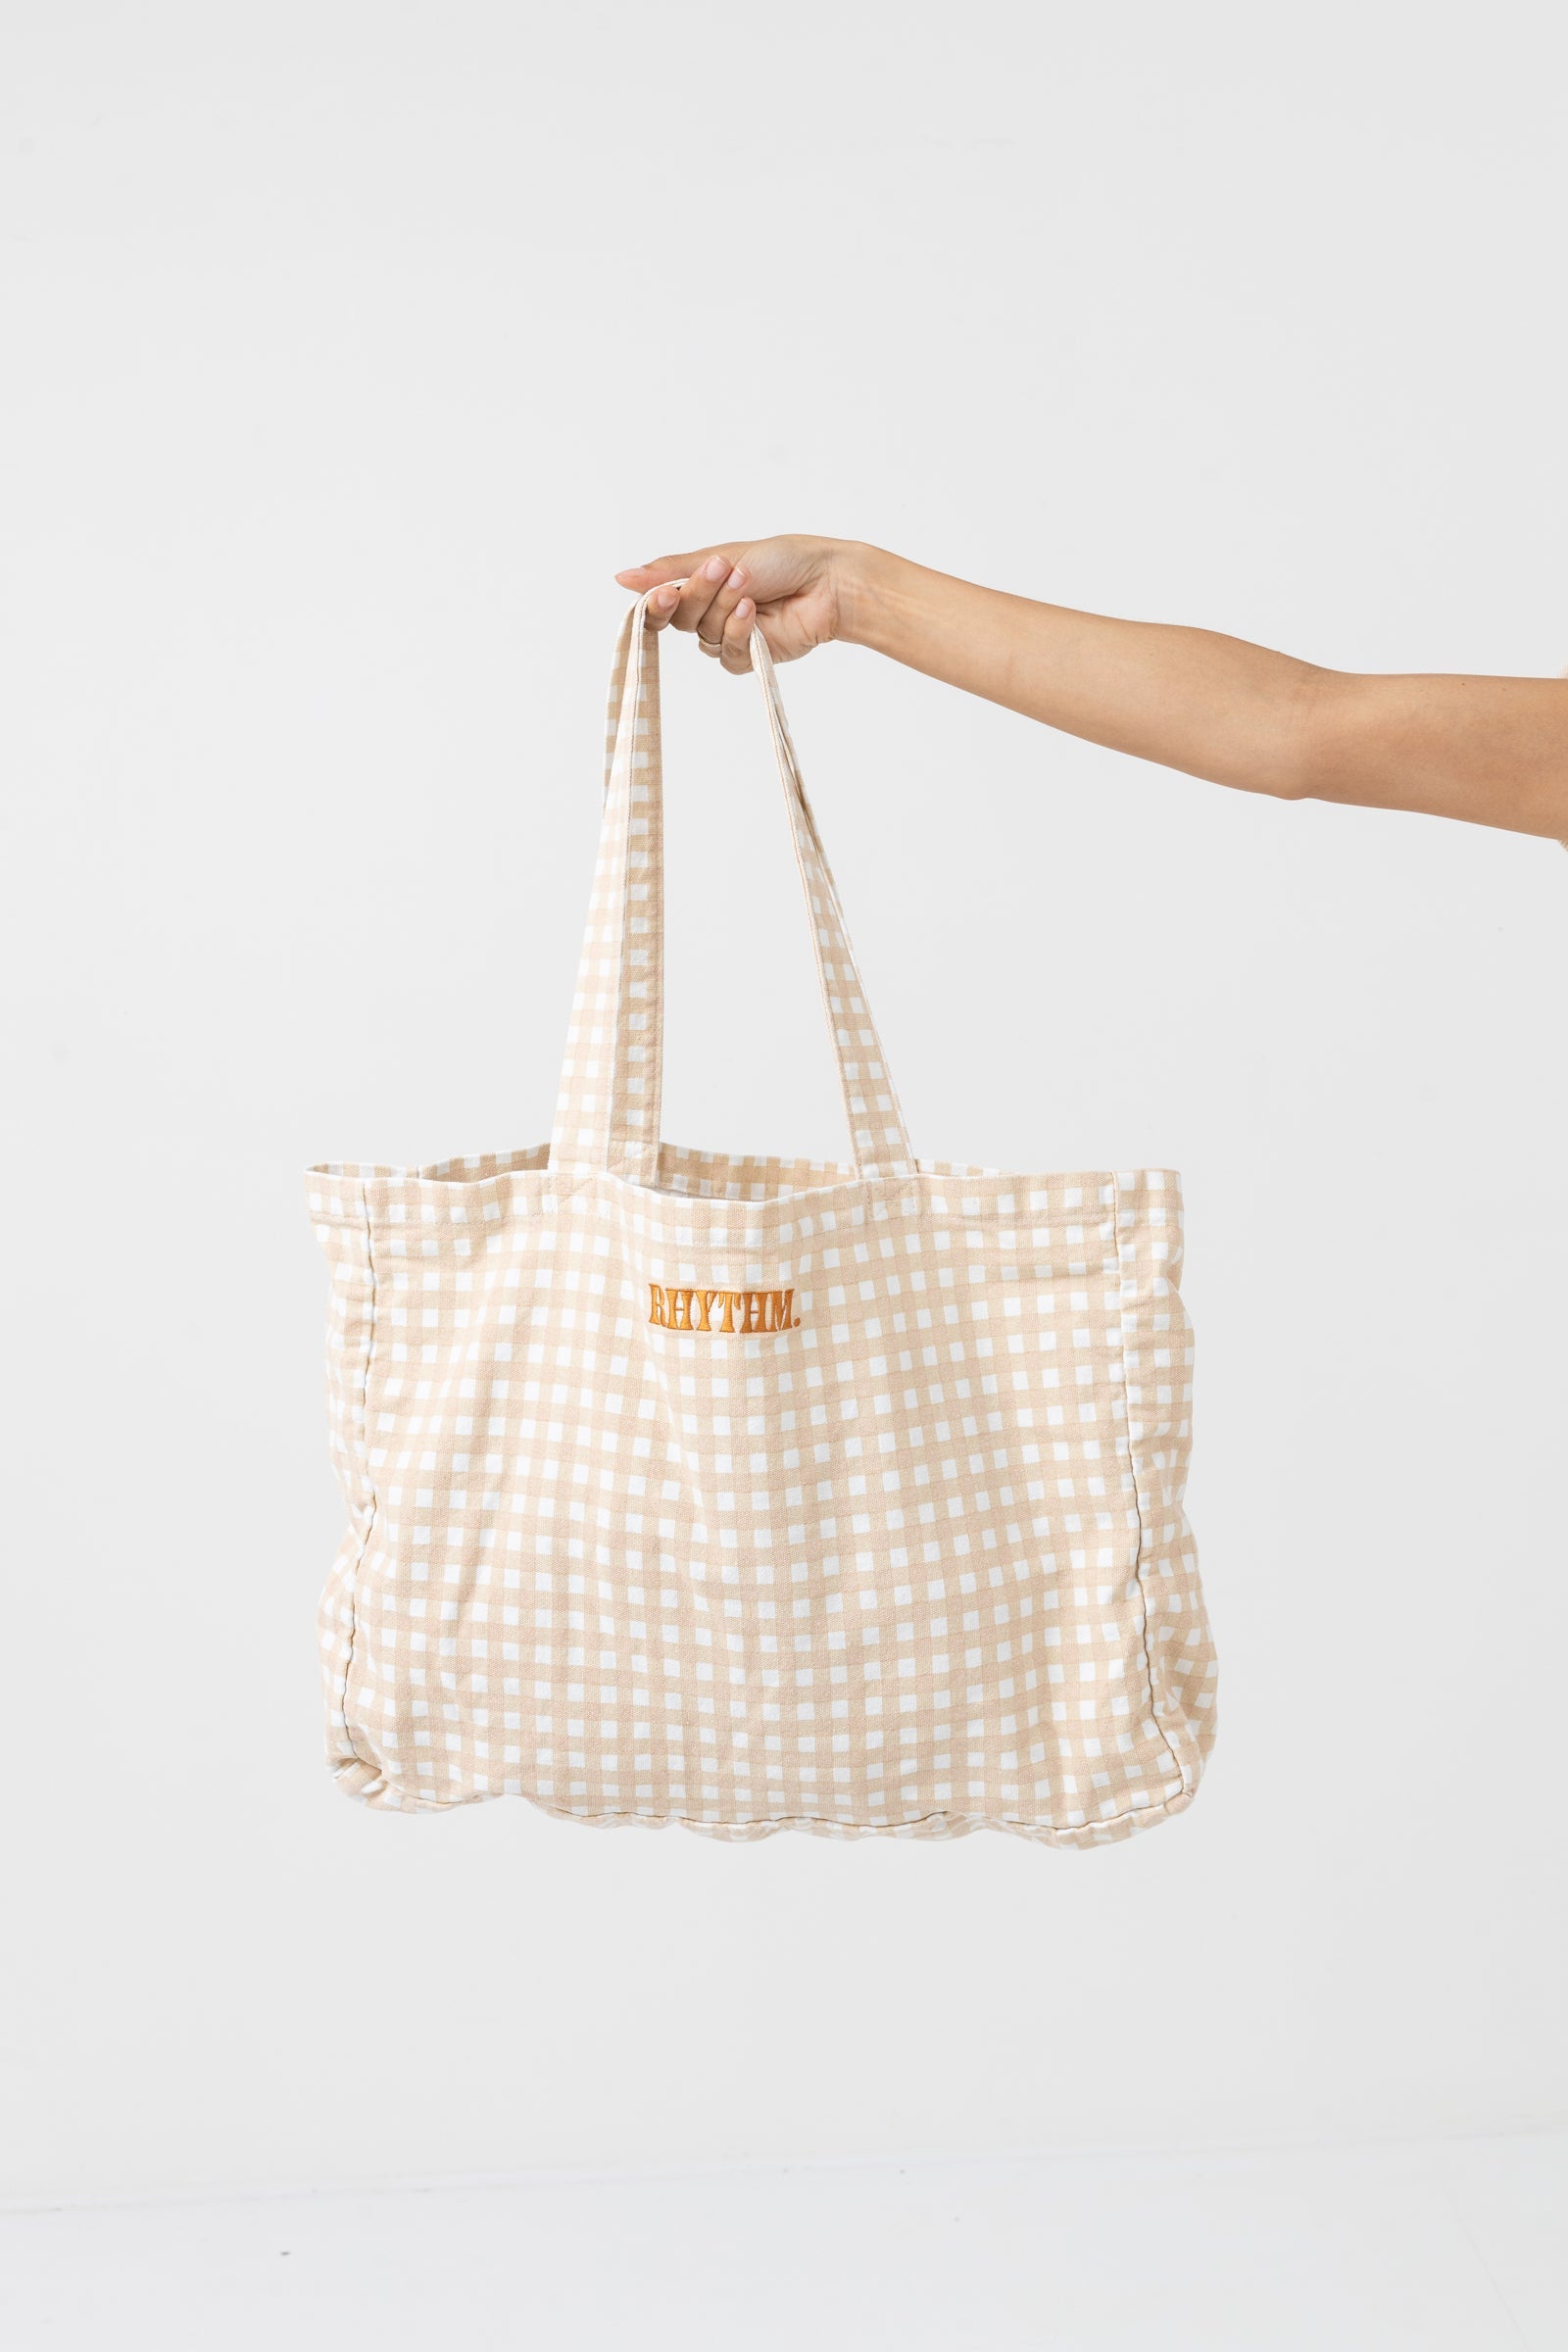 The Daily Tote Bag